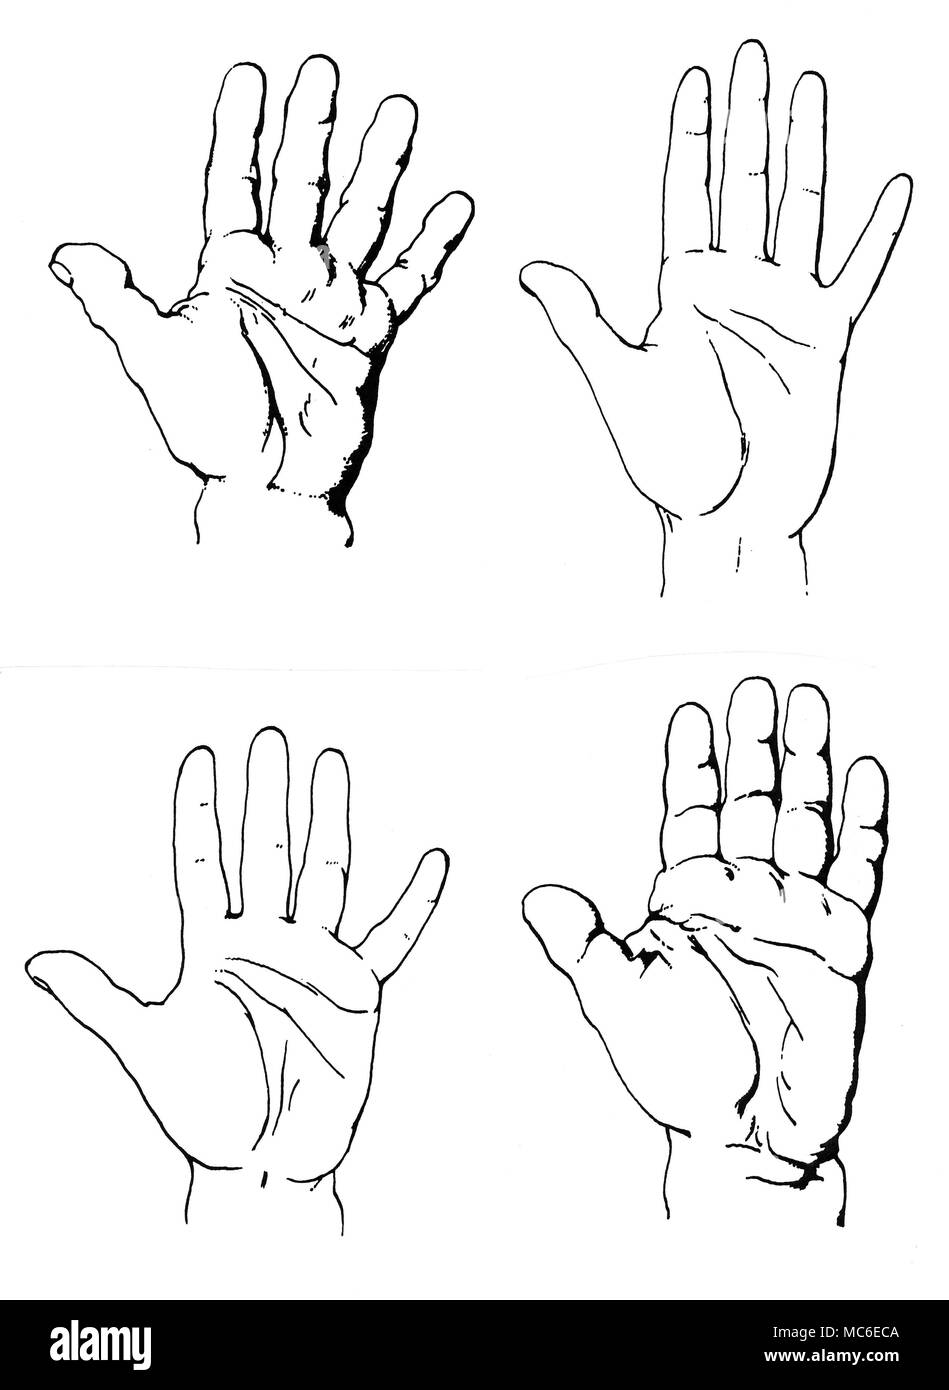 PALMISTRY - CARUS' SYSTEM The four types of hand (the four chirognomies) of Carl Gustav Carus, described in his work, Uber Grund und Bedeutung der verschidenen Formen der Hand in verschiedenen Personen, 1846. Reading left to right, from top: the Elementary Hand; the Psychic Hand, the Sensitive Hand, and the Motoric Hand. Stock Photo